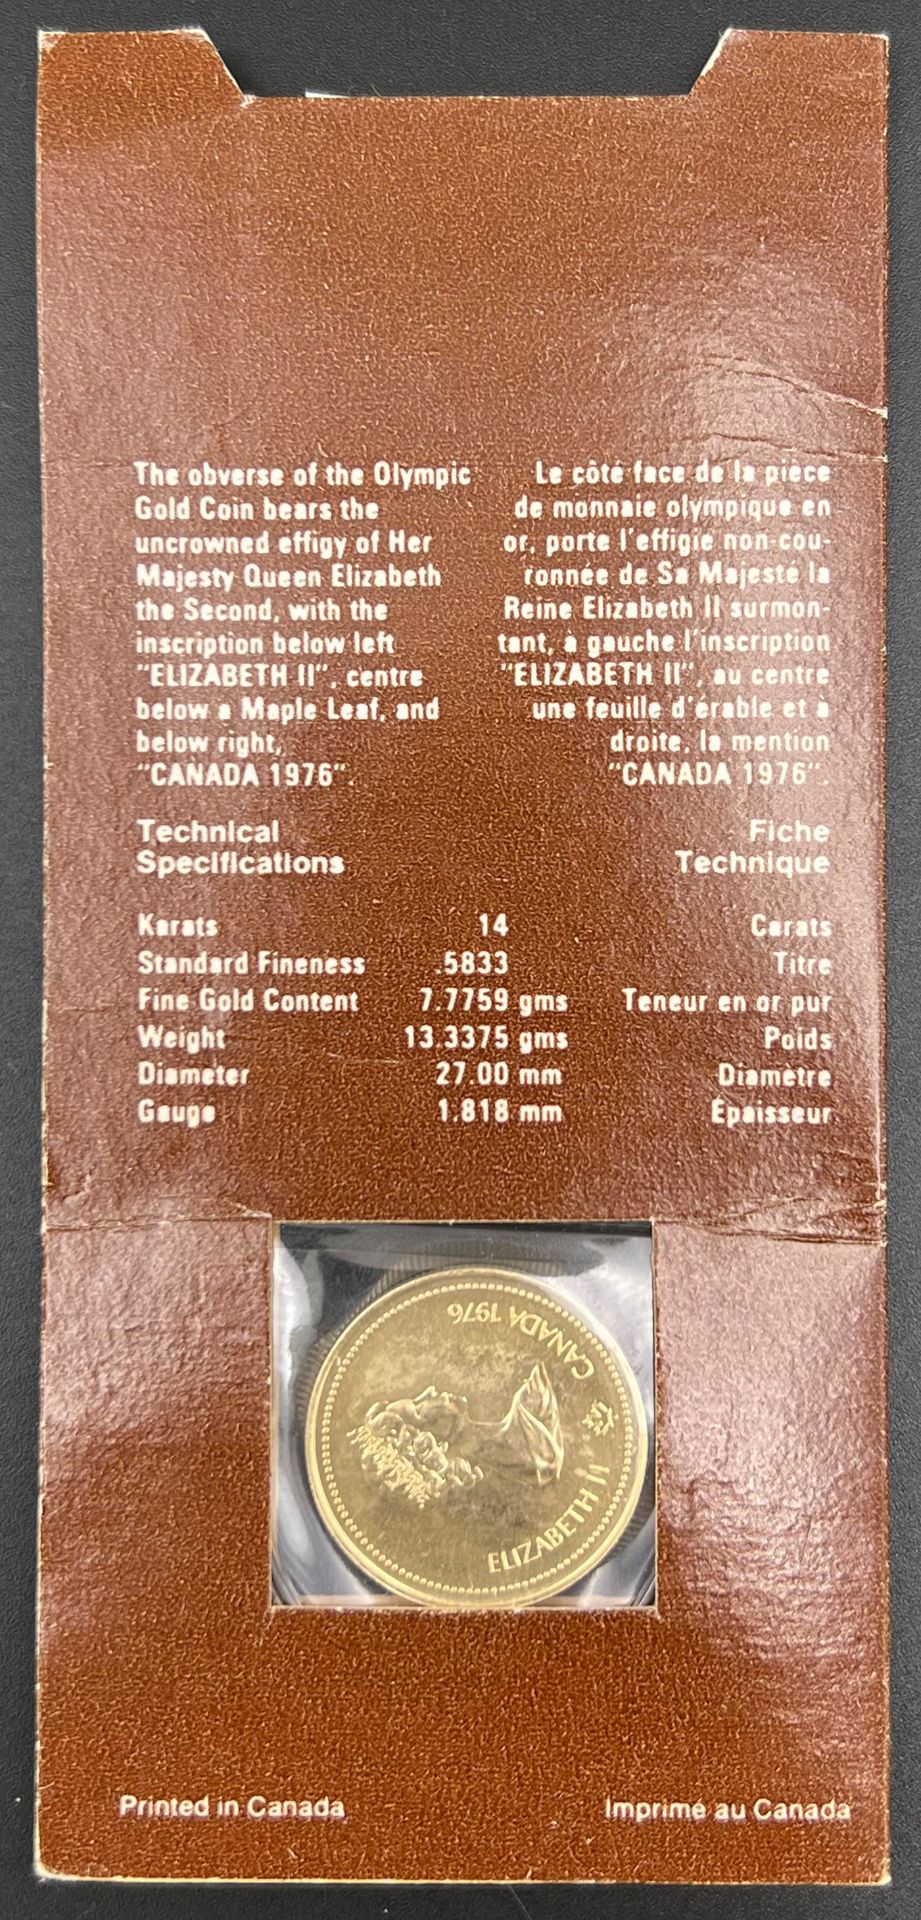 Gold coin 100 Dollars "21st Olympic Games in Montreal / Elizabeth II". Canada 1976. - Image 3 of 4